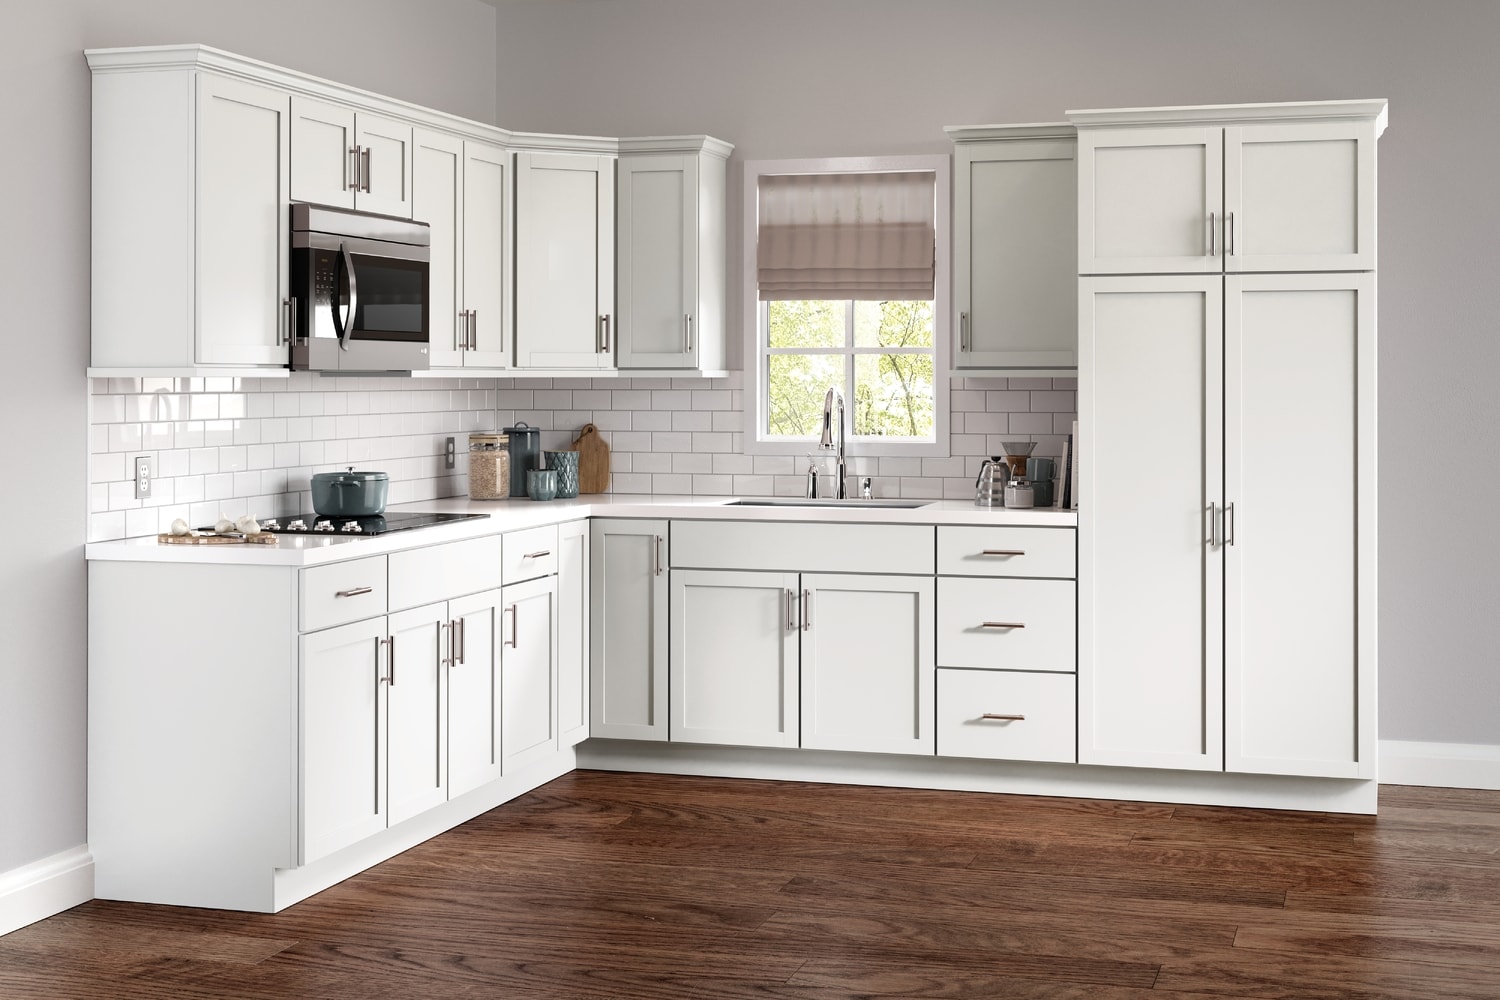 Project Source 30 In W X H 12 D White Door Wall Fully Assembled Cabinet Recessed Panel Shaker Style The Kitchen Cabinets Department At Lowes Com